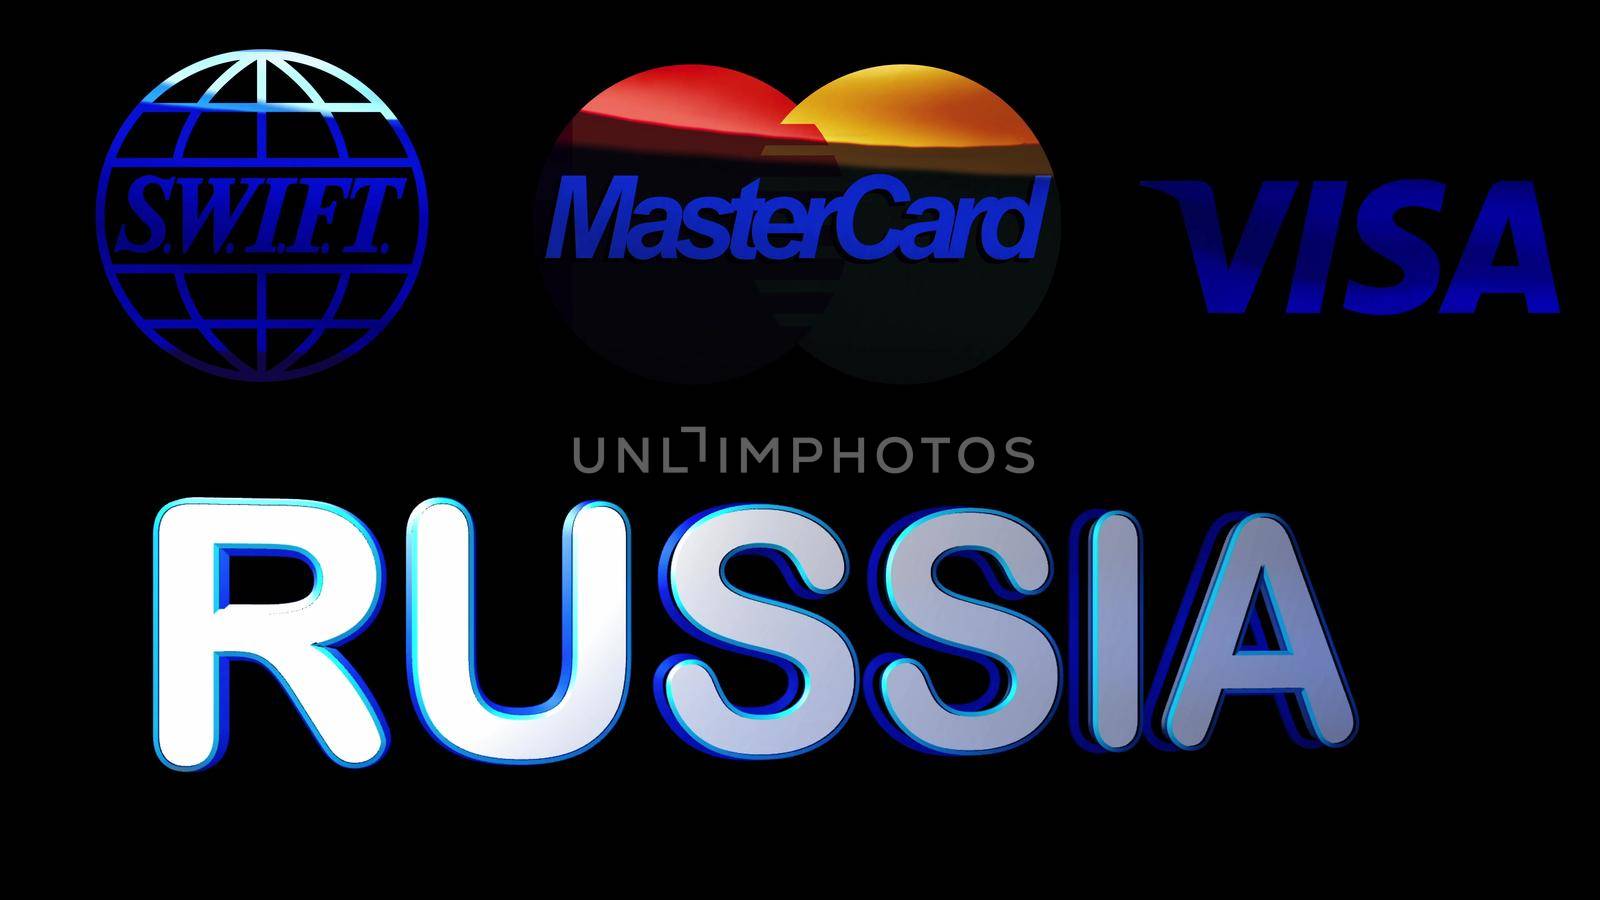 Russia, Syzran - FEBRUARY 27, 2022: Russia and swift, visa, mastercard signs, animated text on a black background, disconnecting Russia from international payments, imposing sanctions